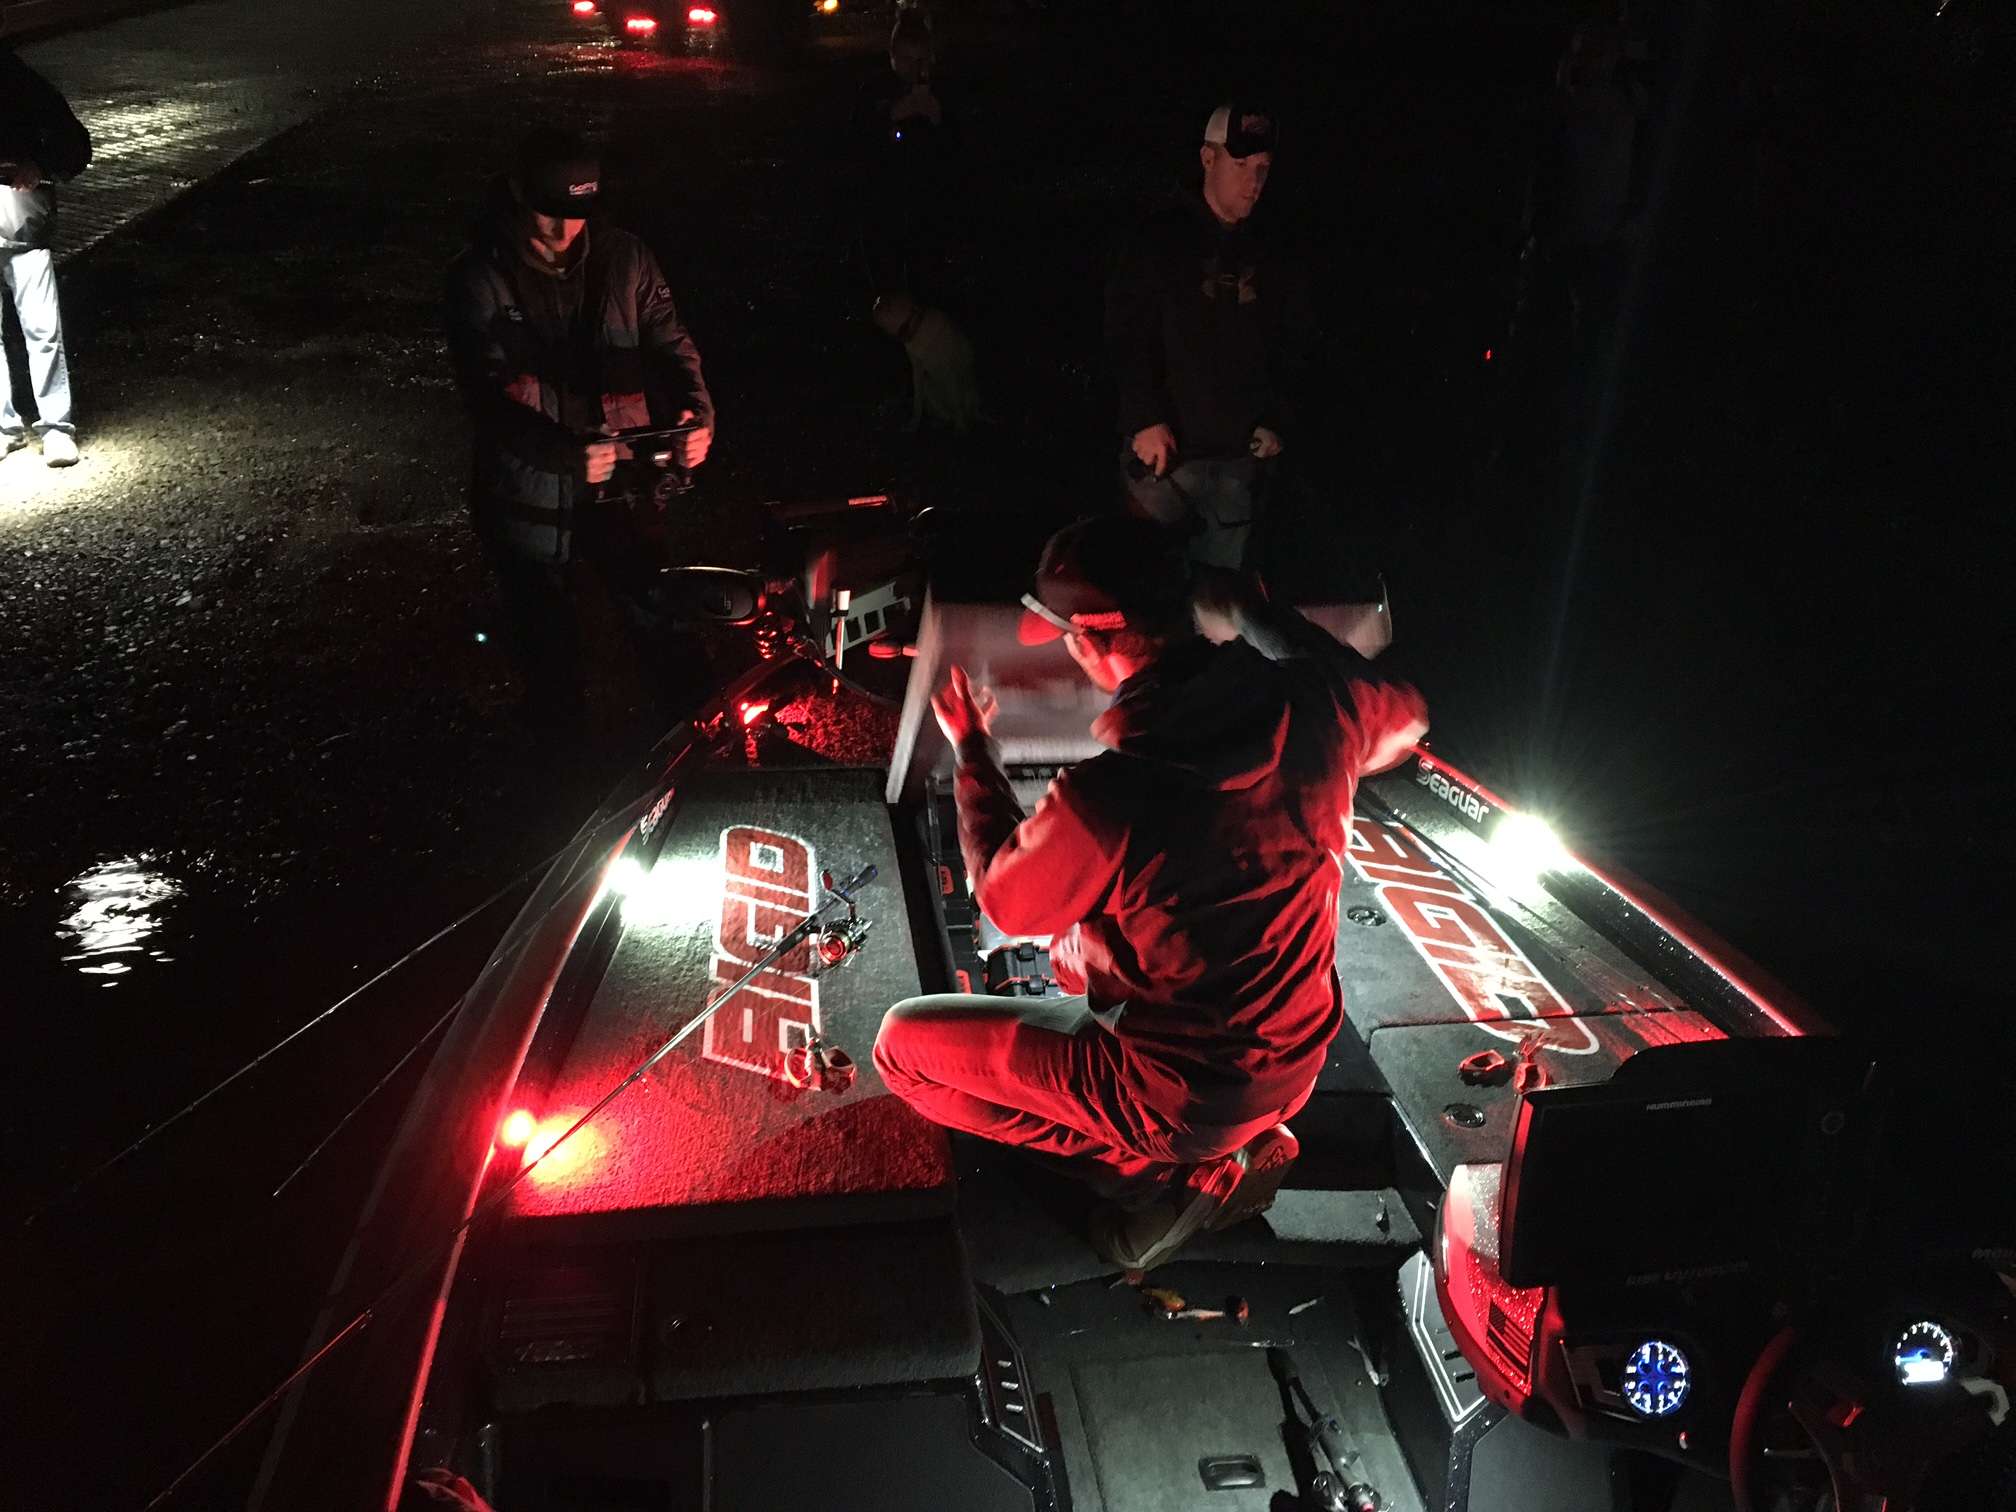 Brandon Palaniuk is focused and hard at work preparing for today's launch and his shot at only one thing, that's moving up from spot 12. Being at the last spot making the cut, Brandon is excited to move up.  Here we go for Day 4 on the water of the Bassmaster Elite at Cherokee Lake.

<br><br><br><i><b>Missed any Marshal-action this week? Check out the other galleries! <br><a href=http://www.bassmaster.com/slideshow/day-3-live-marshals target=